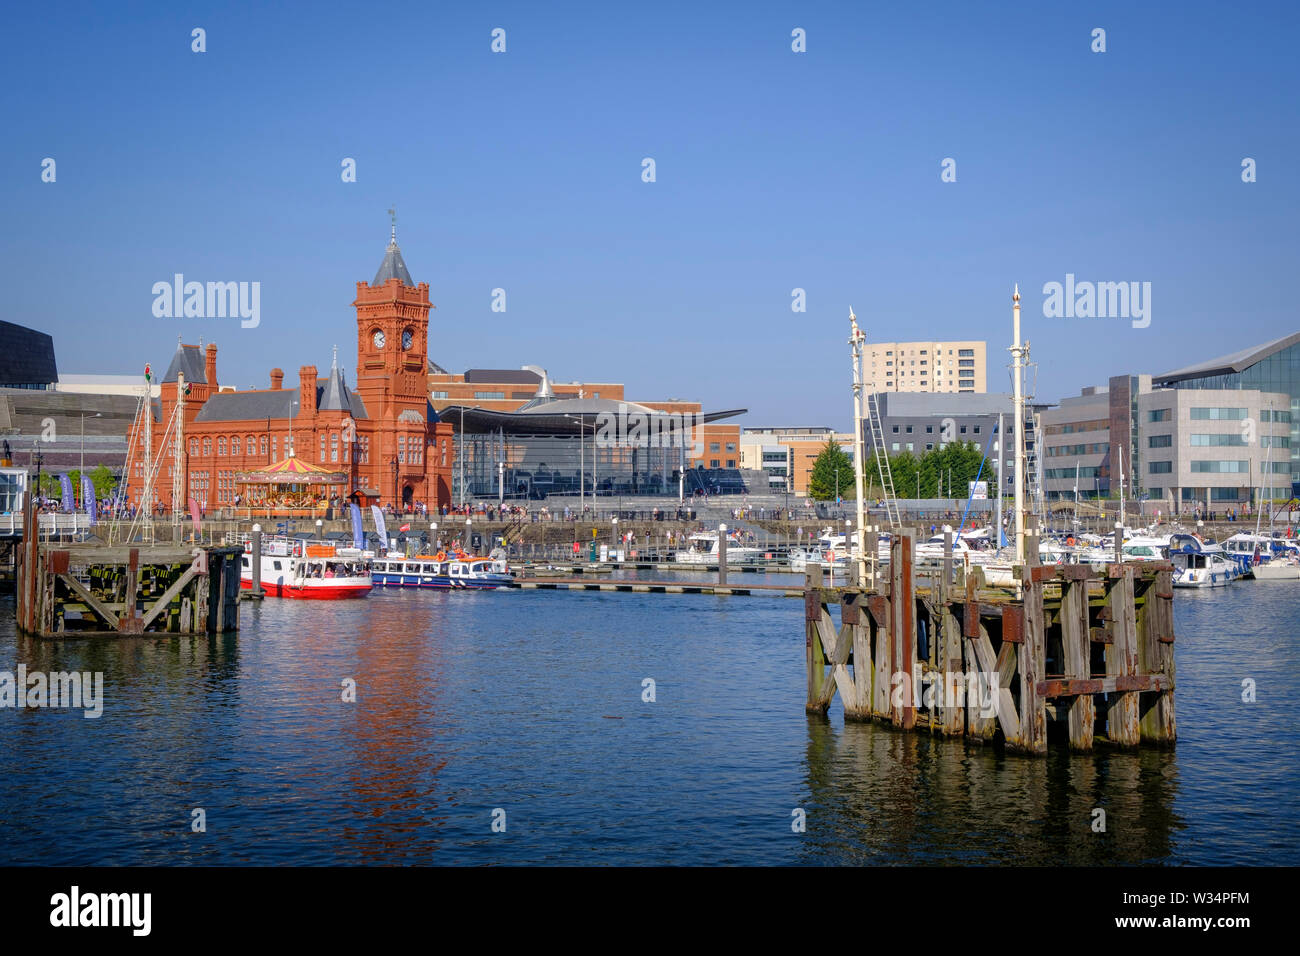 Welsh National Assembly Building der Senedd & Pier House Cardiff Bay Cardiff Wales Stockfoto